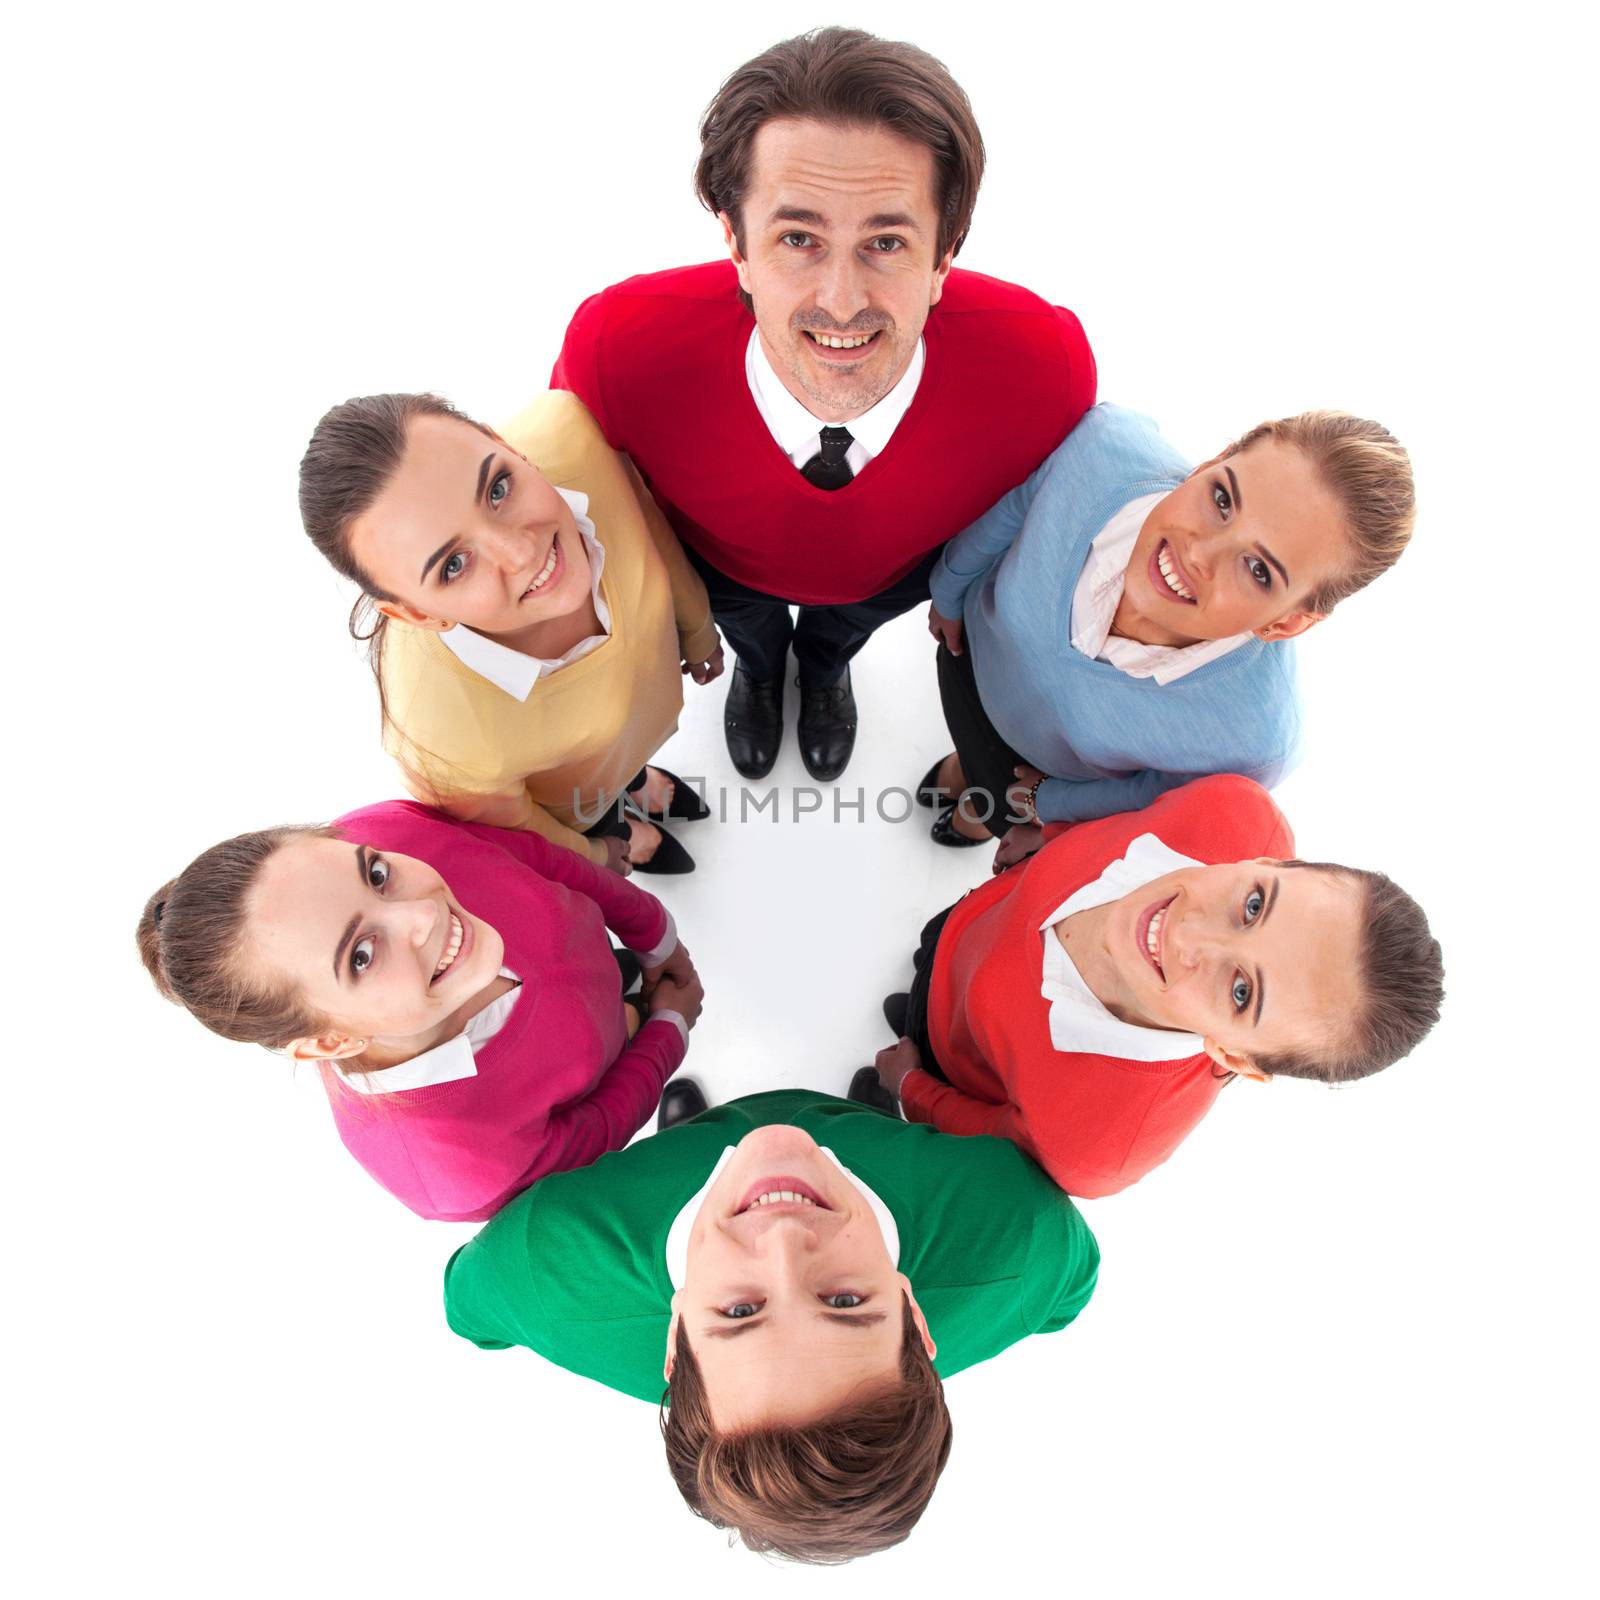 Top view of happy young people group isolated on white background